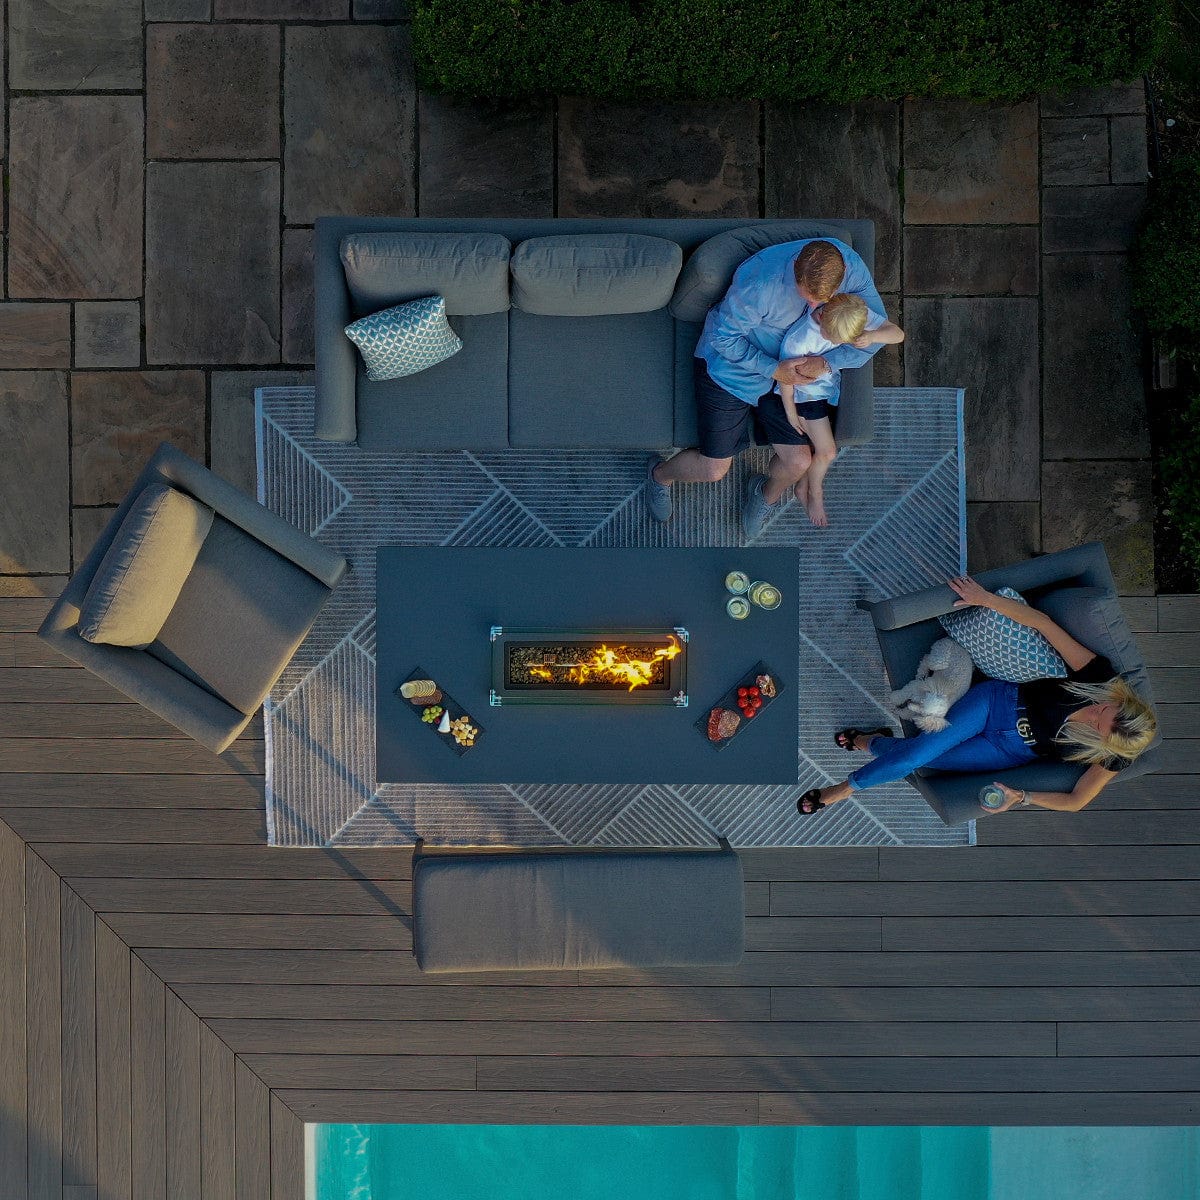 Maze Outdoors Pulse 3 Seat Sofa Set with Fire Pit Table / Flanelle House of Isabella UK